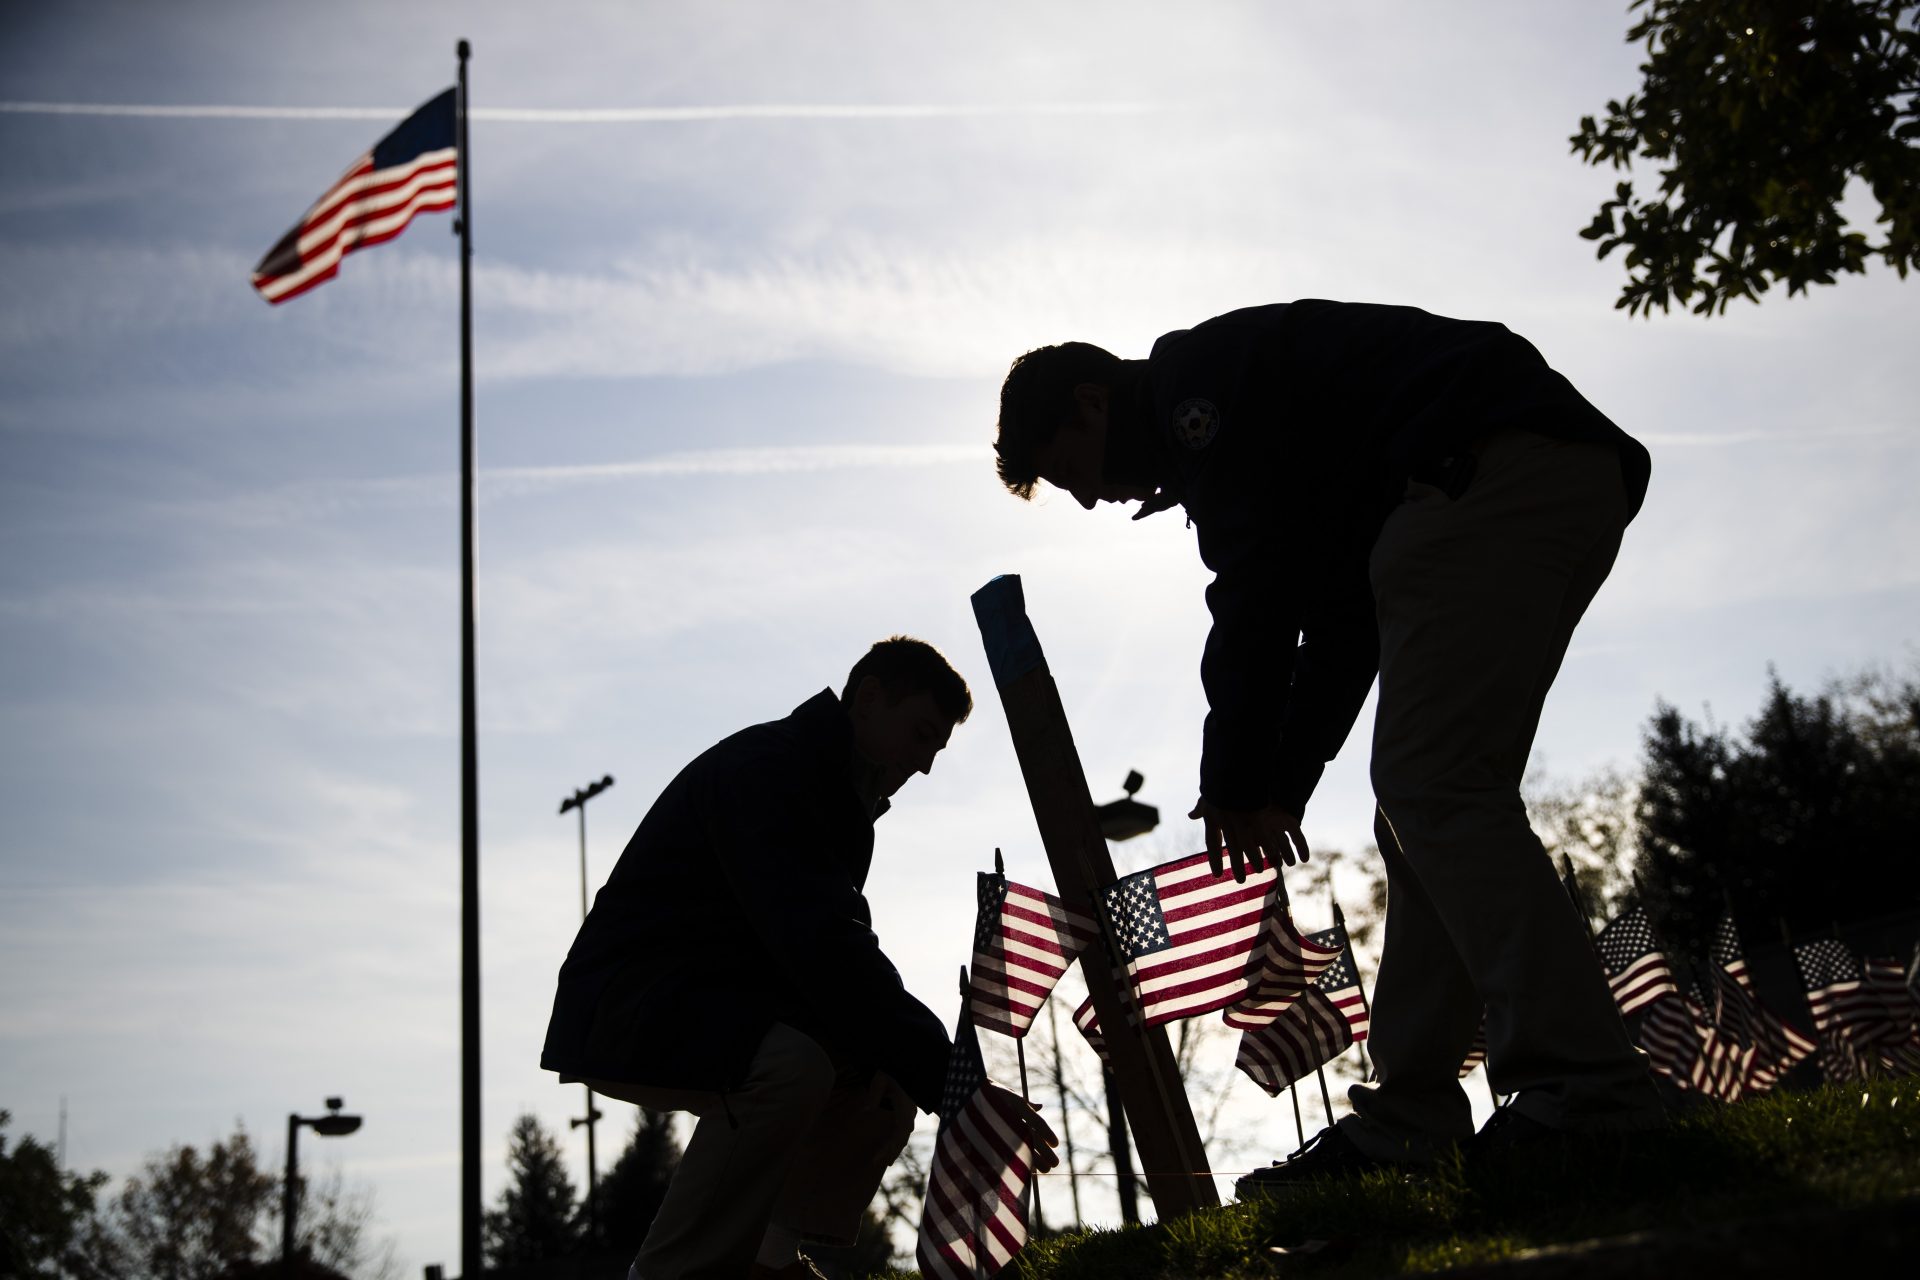 American flags are posted in the ground ahead of a Veterans Day ceremony at the Vietnam War Memorial in Philadelphia, Monday, Nov. 11, 2019.